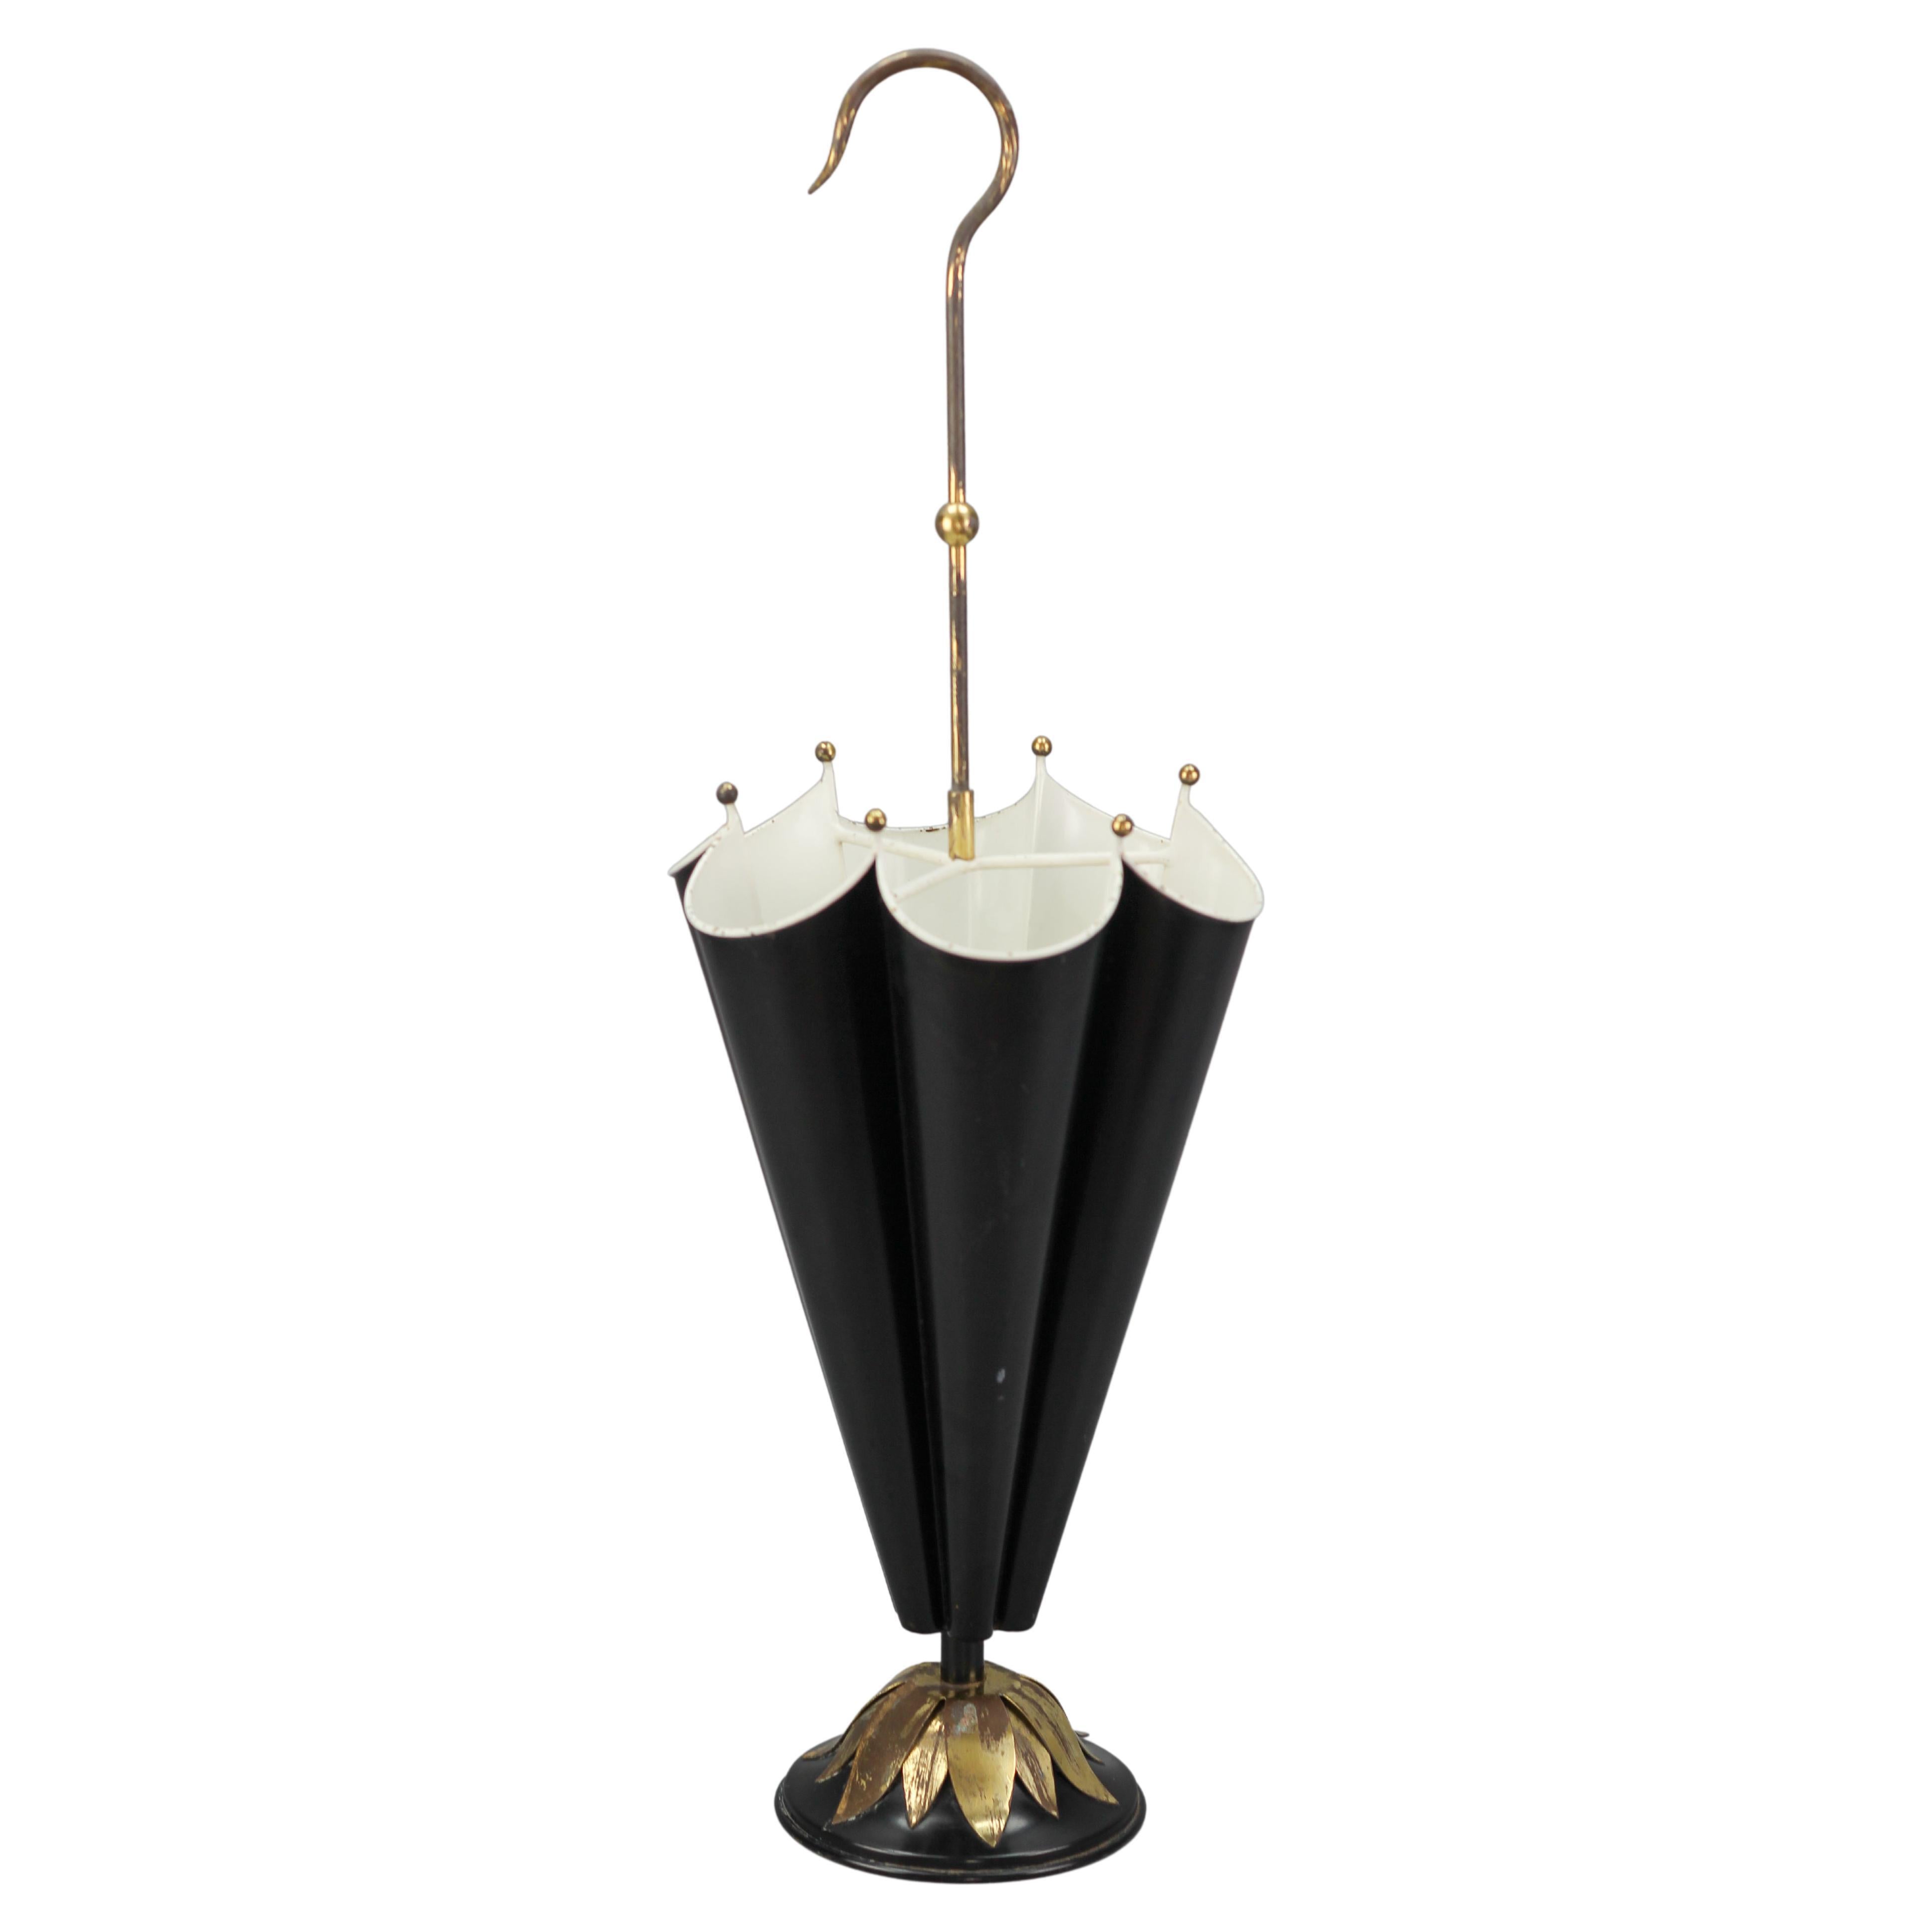 French Umbrella-Shaped Black and White Metal and Brass Umbrella Stand